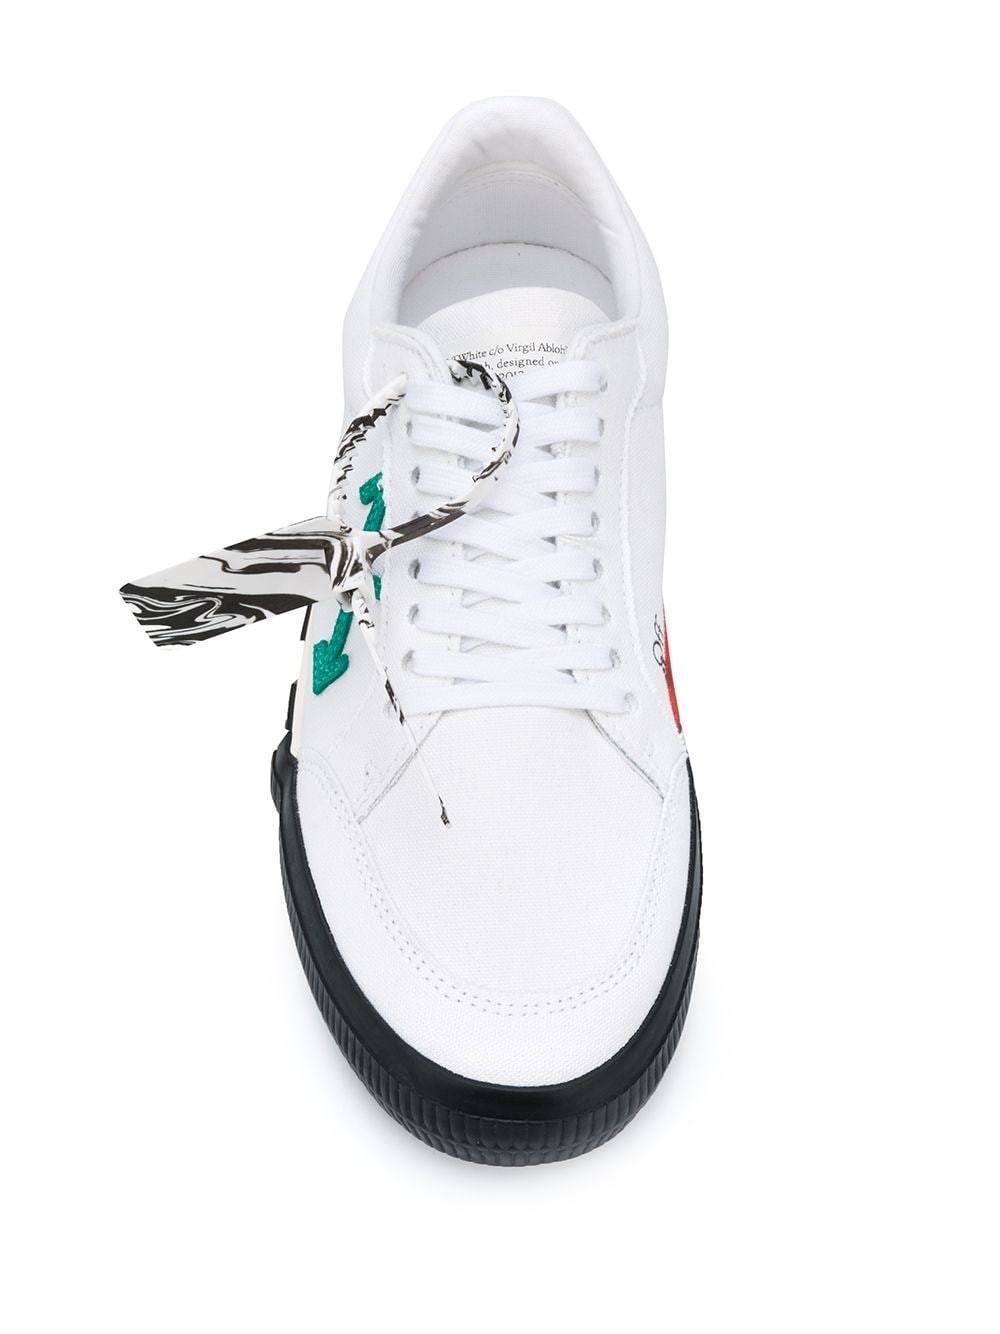 off-white LOW TOP SNEAKERS available on montiboutique.com - 34889